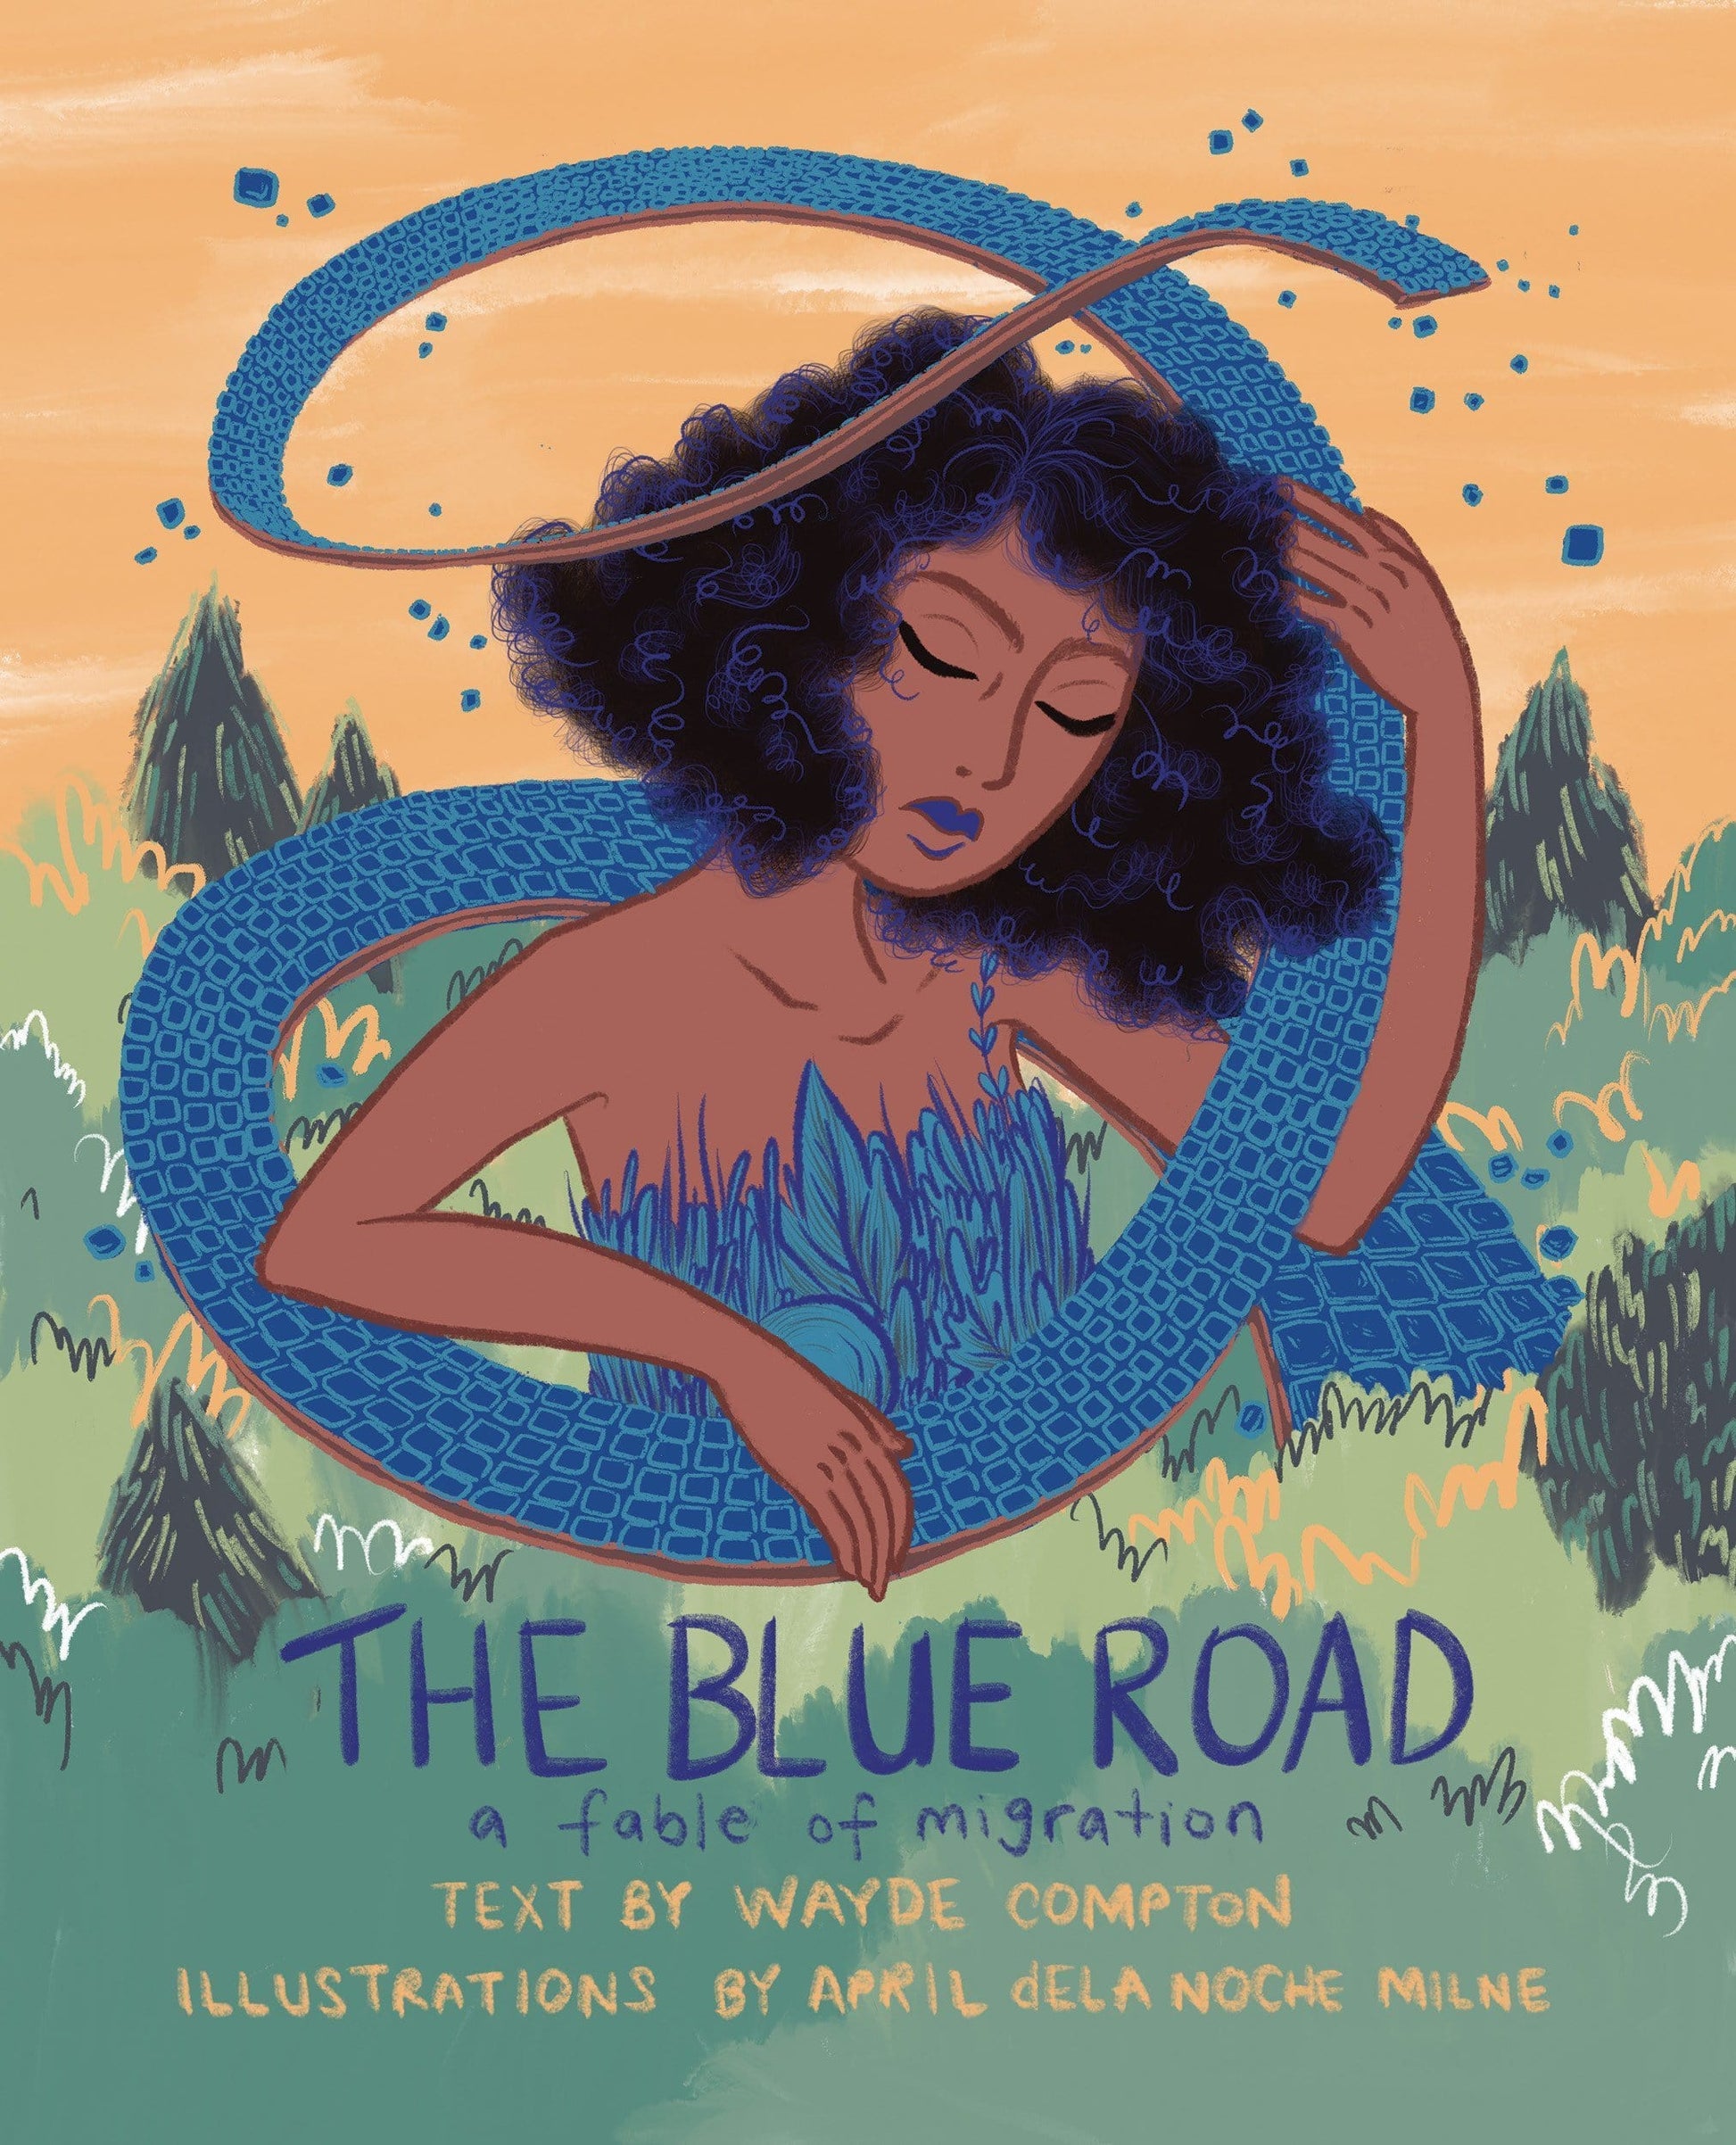 LibrairieRacines The Blue Road: A Fable of Migration Text by Wayde Compton and April dela Noche Milne